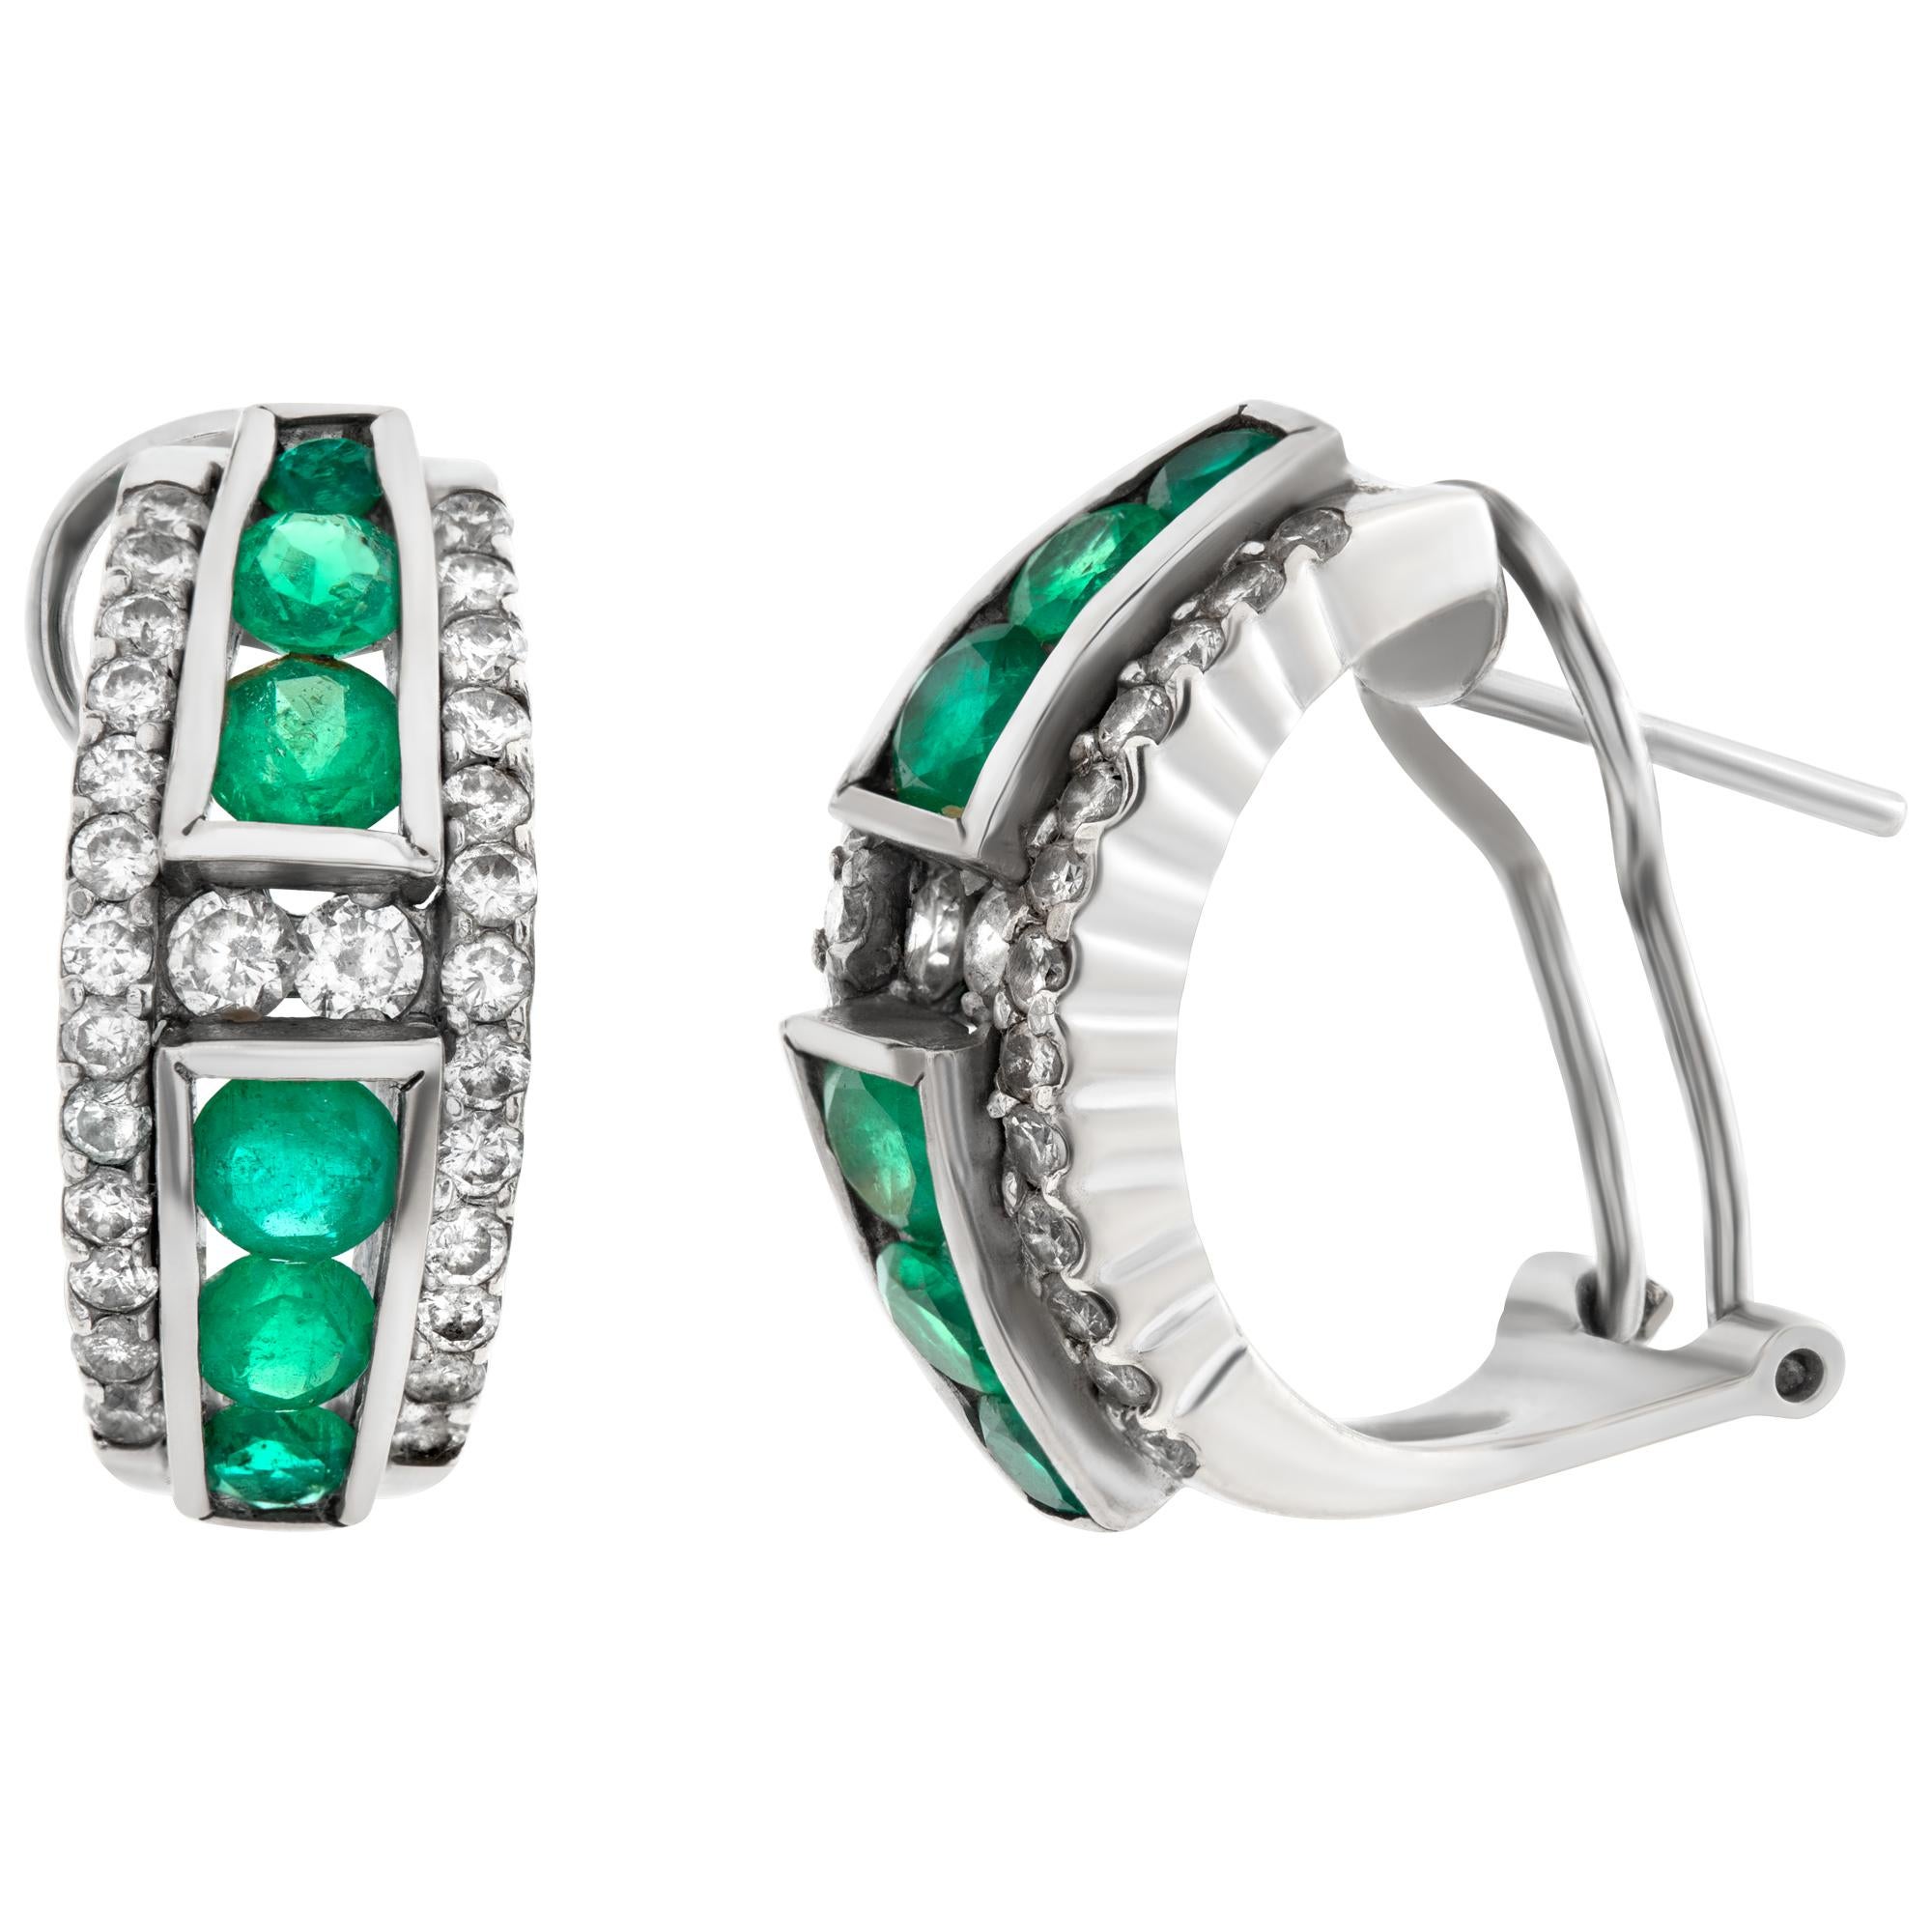 Diamond and Emerald huggie earrings in 18k white gold with omega clip backs. Approximately 0.42 carat in diamonds and 1.28 carat in round emeralds. Measures 20mm x 8mm.
